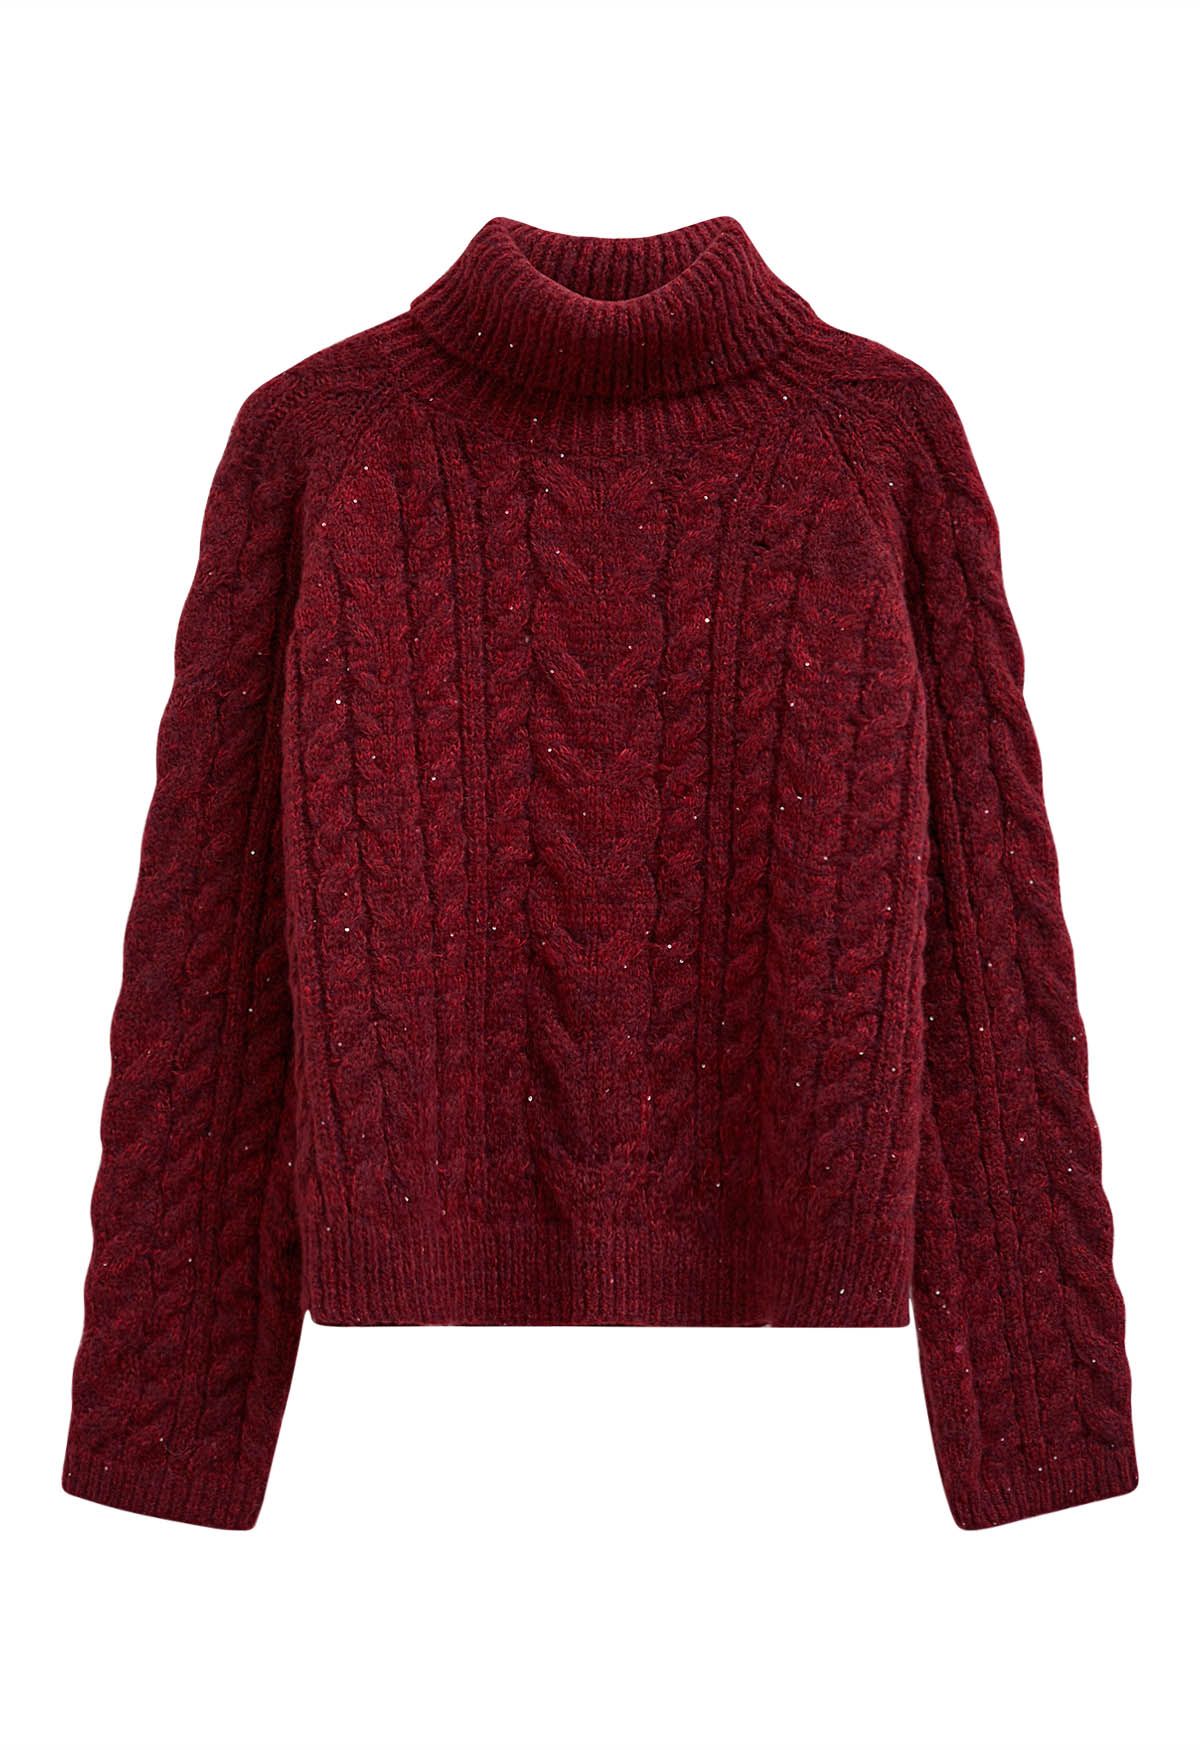 Turtleneck Sequin Cable Knit Sweater in Red